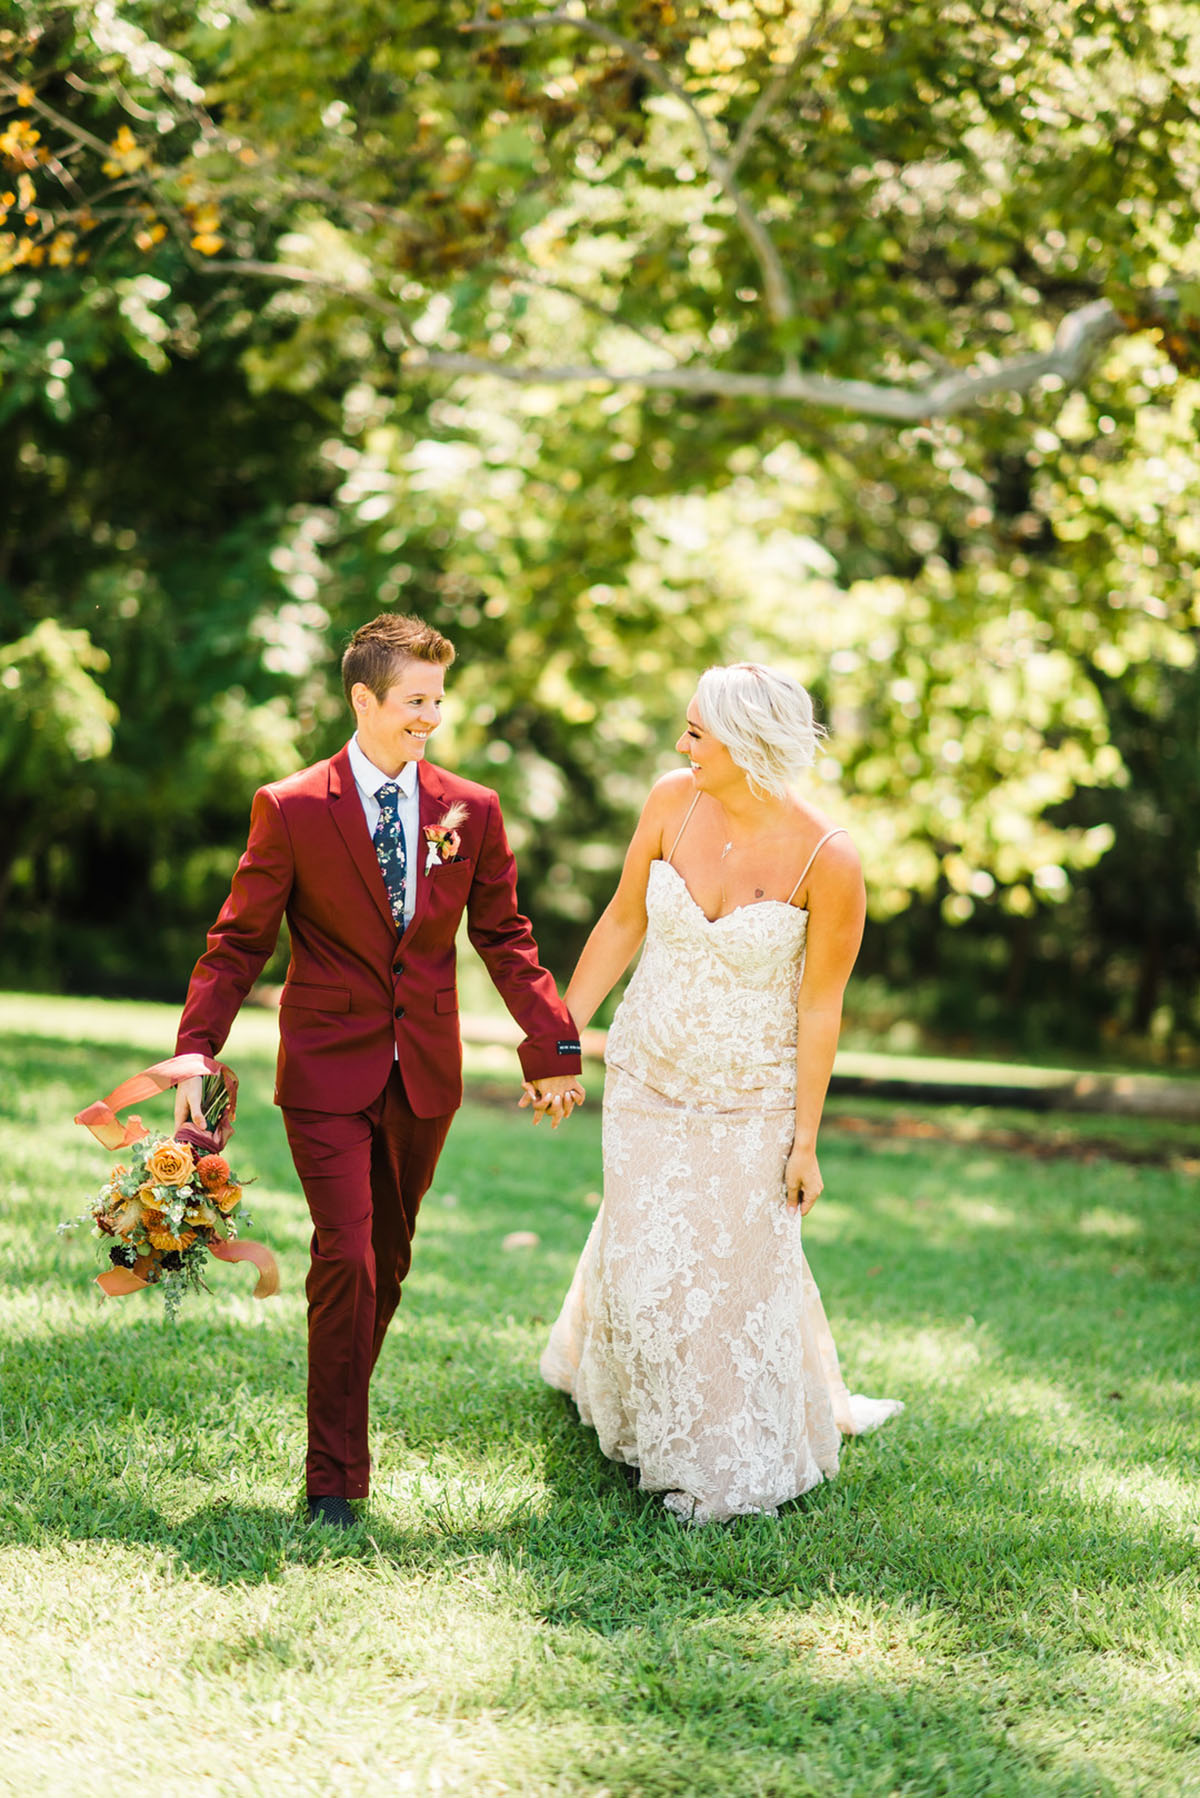 Bright bohemian wedding inspiration two brides burgundy red tux white dress colorful flowers long veil holding hands